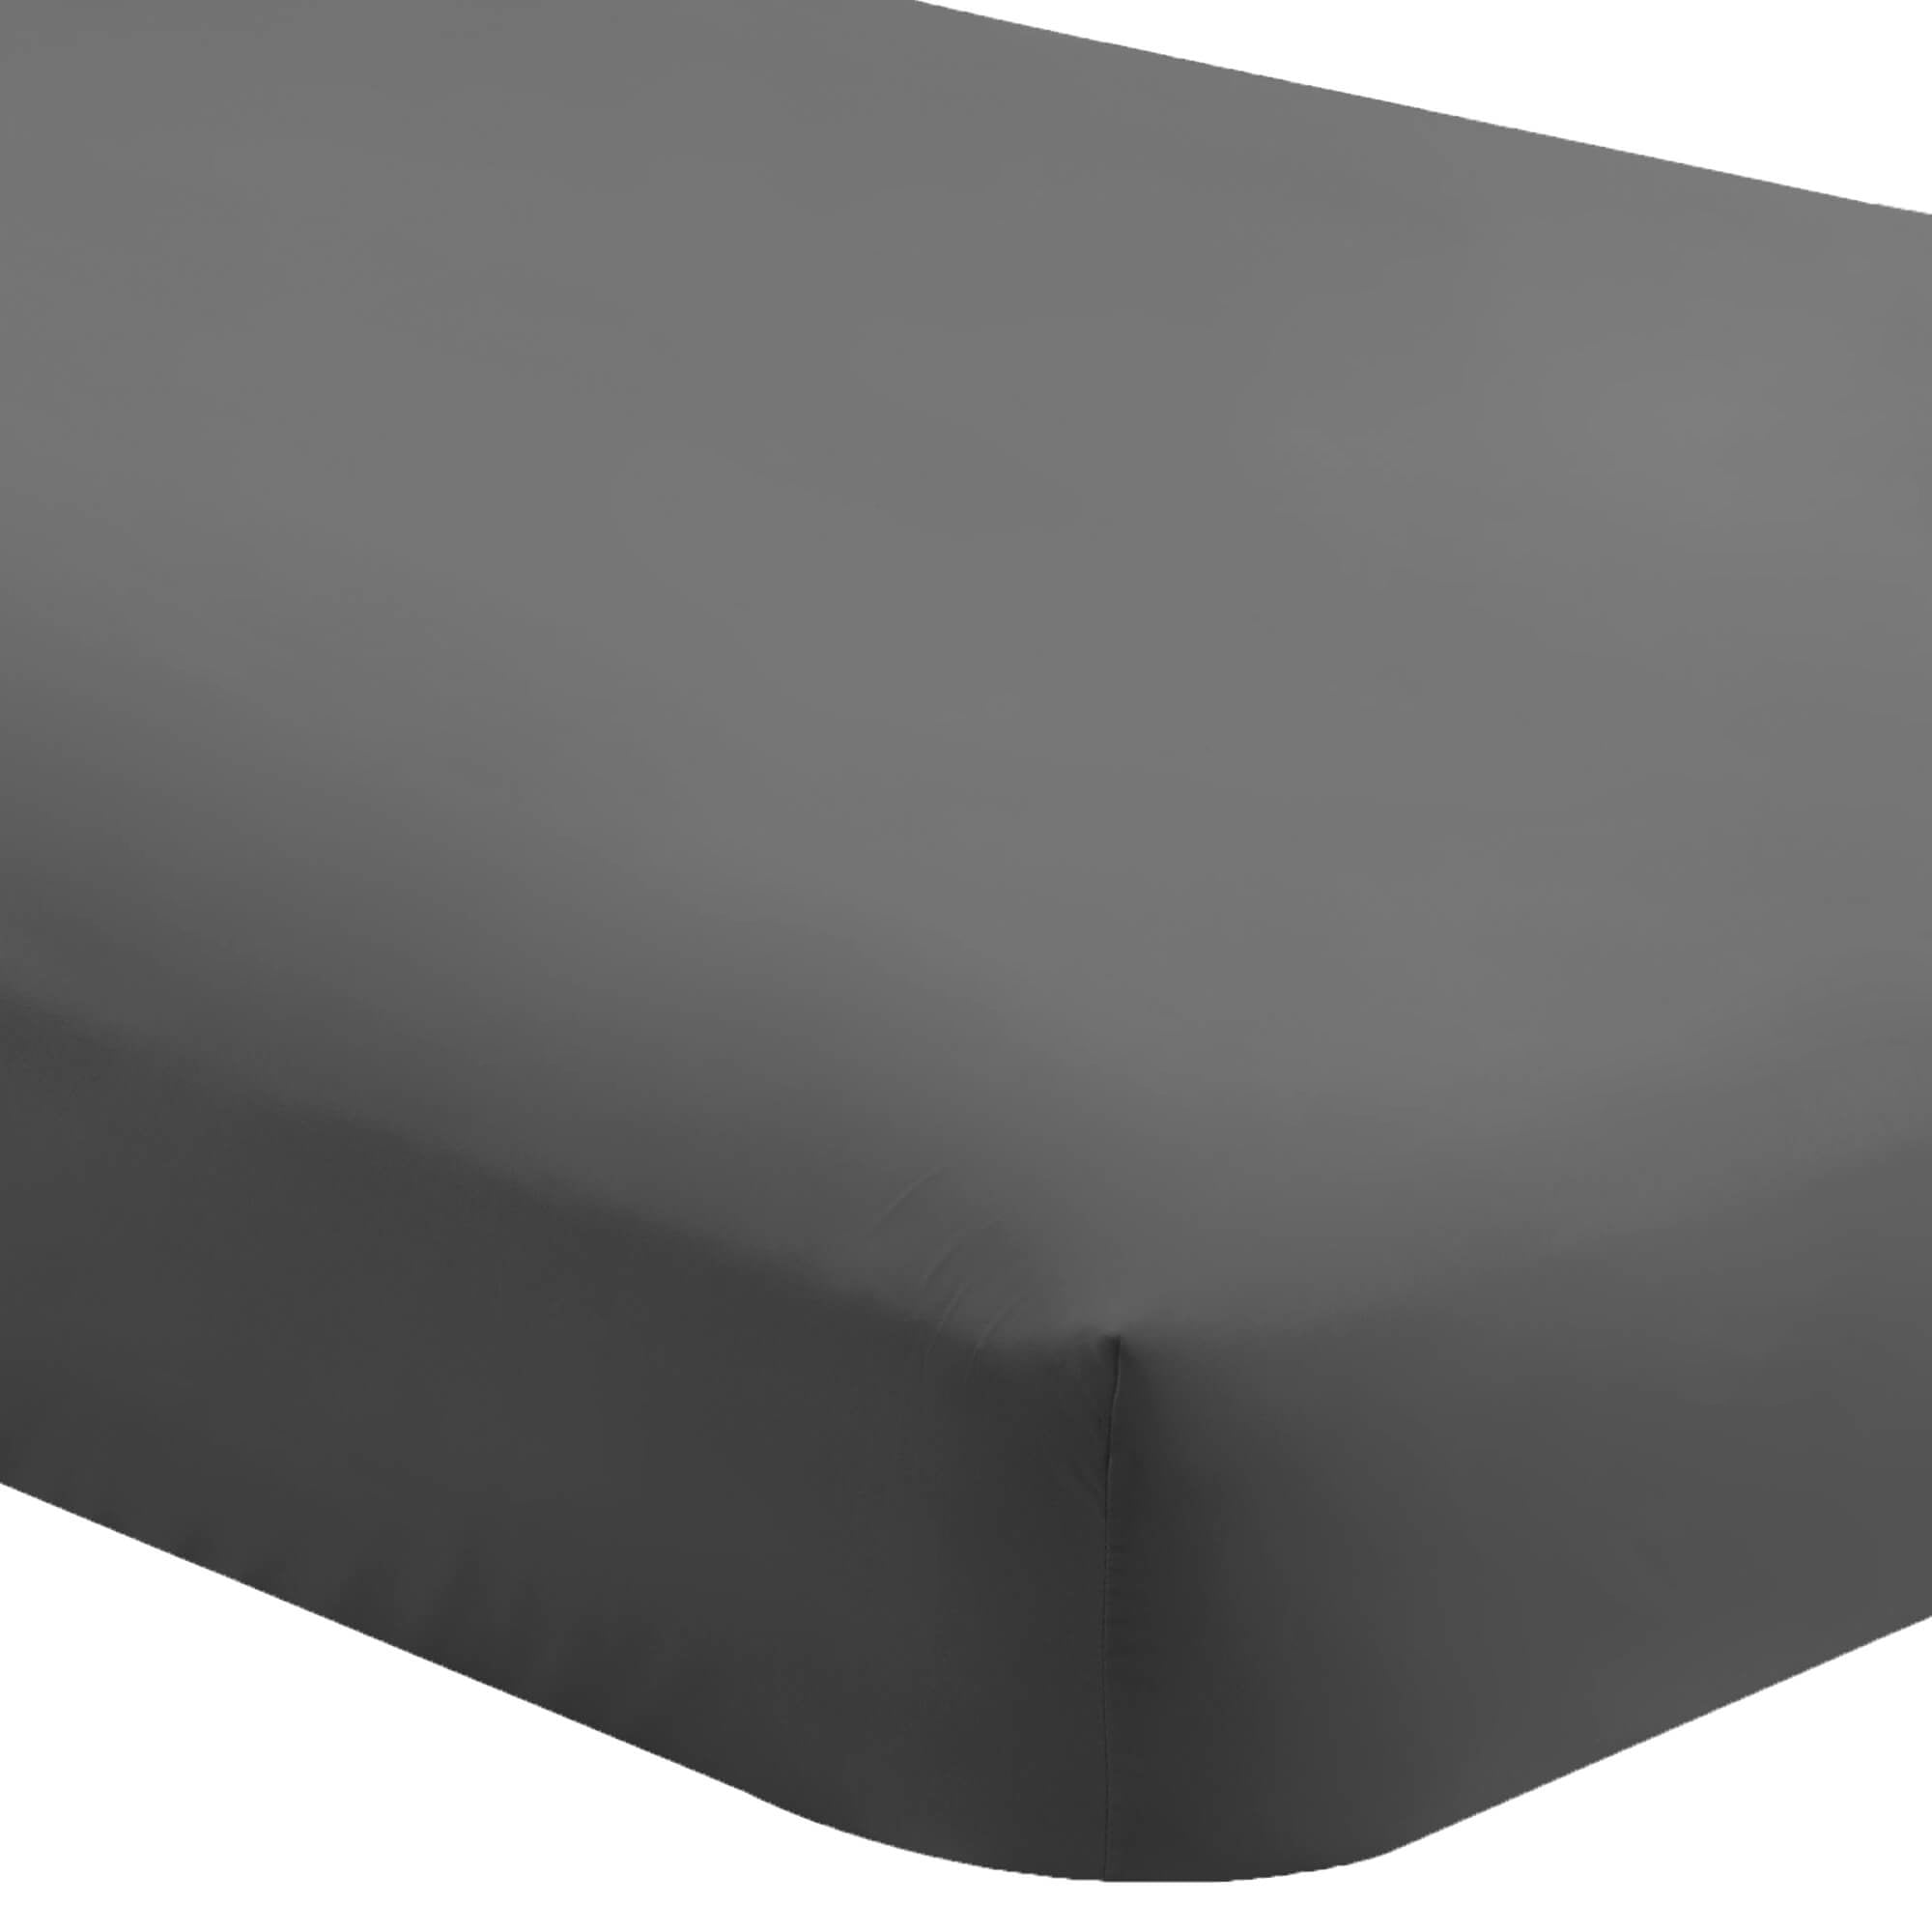 Bare Home 2-Pack Microfiber Fitted Bottom Sheets - Bed Bath & Beyond -  12024720